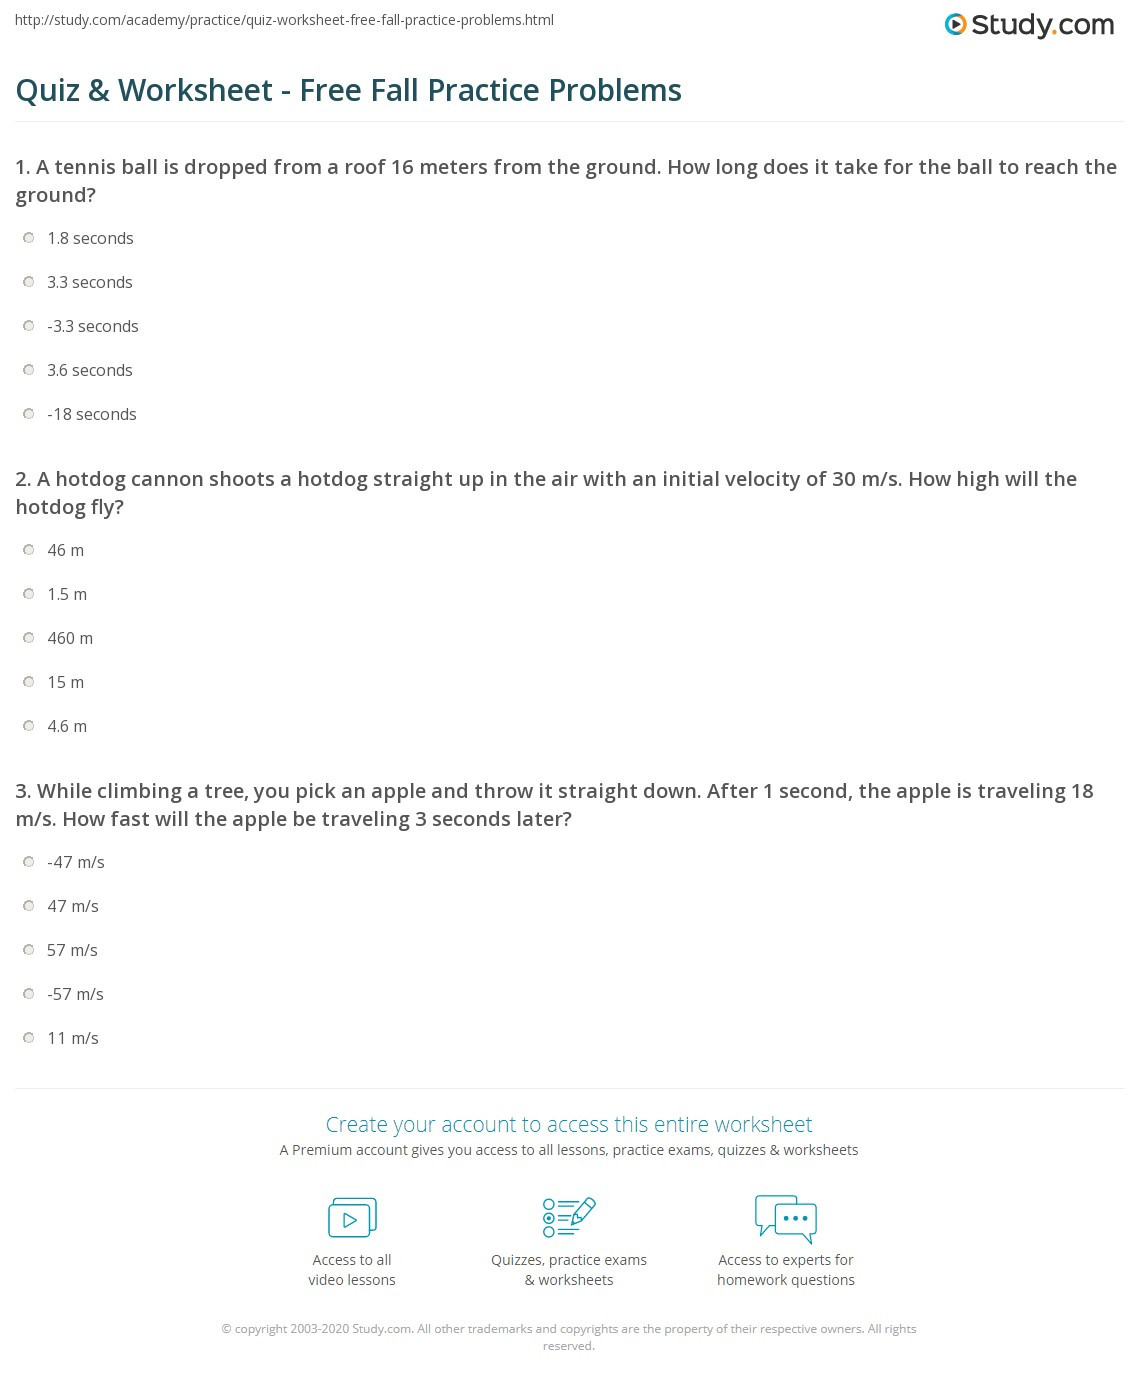 Free Fall Problems Worksheet Quiz &amp; Worksheet Free Fall Practice Problems